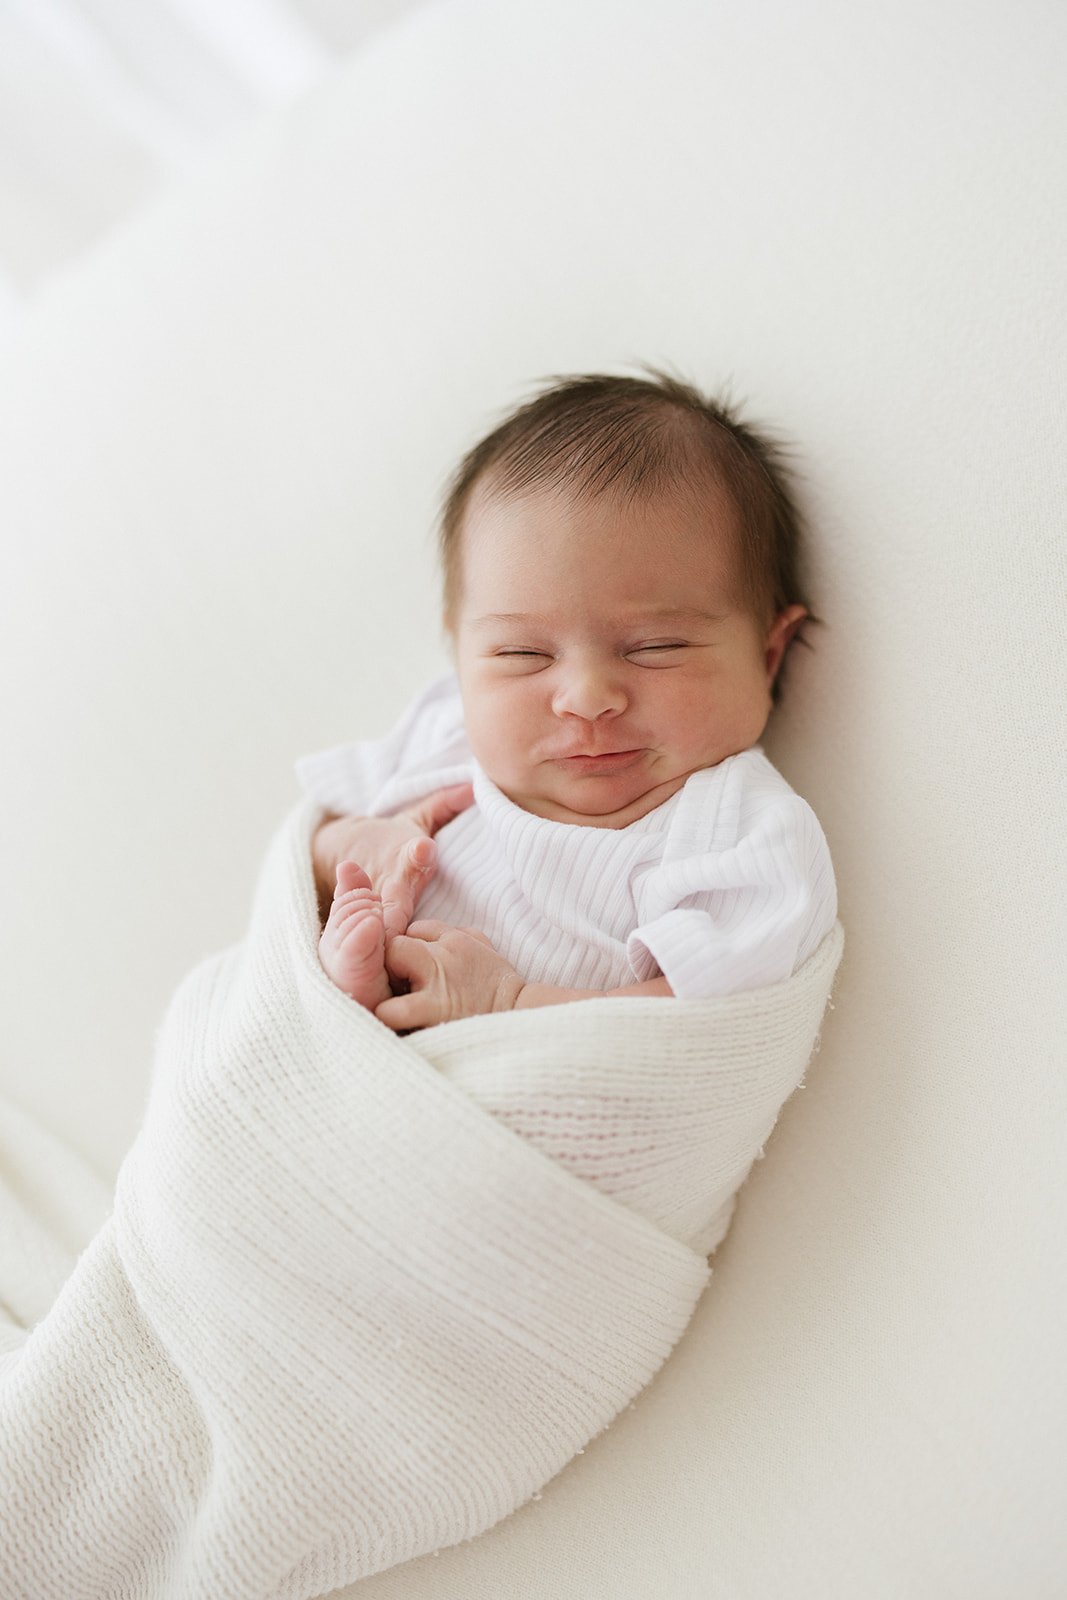  a newborn baby with dark hair is photographed in a white wrap. The baby has a cute squishy face and is smiling